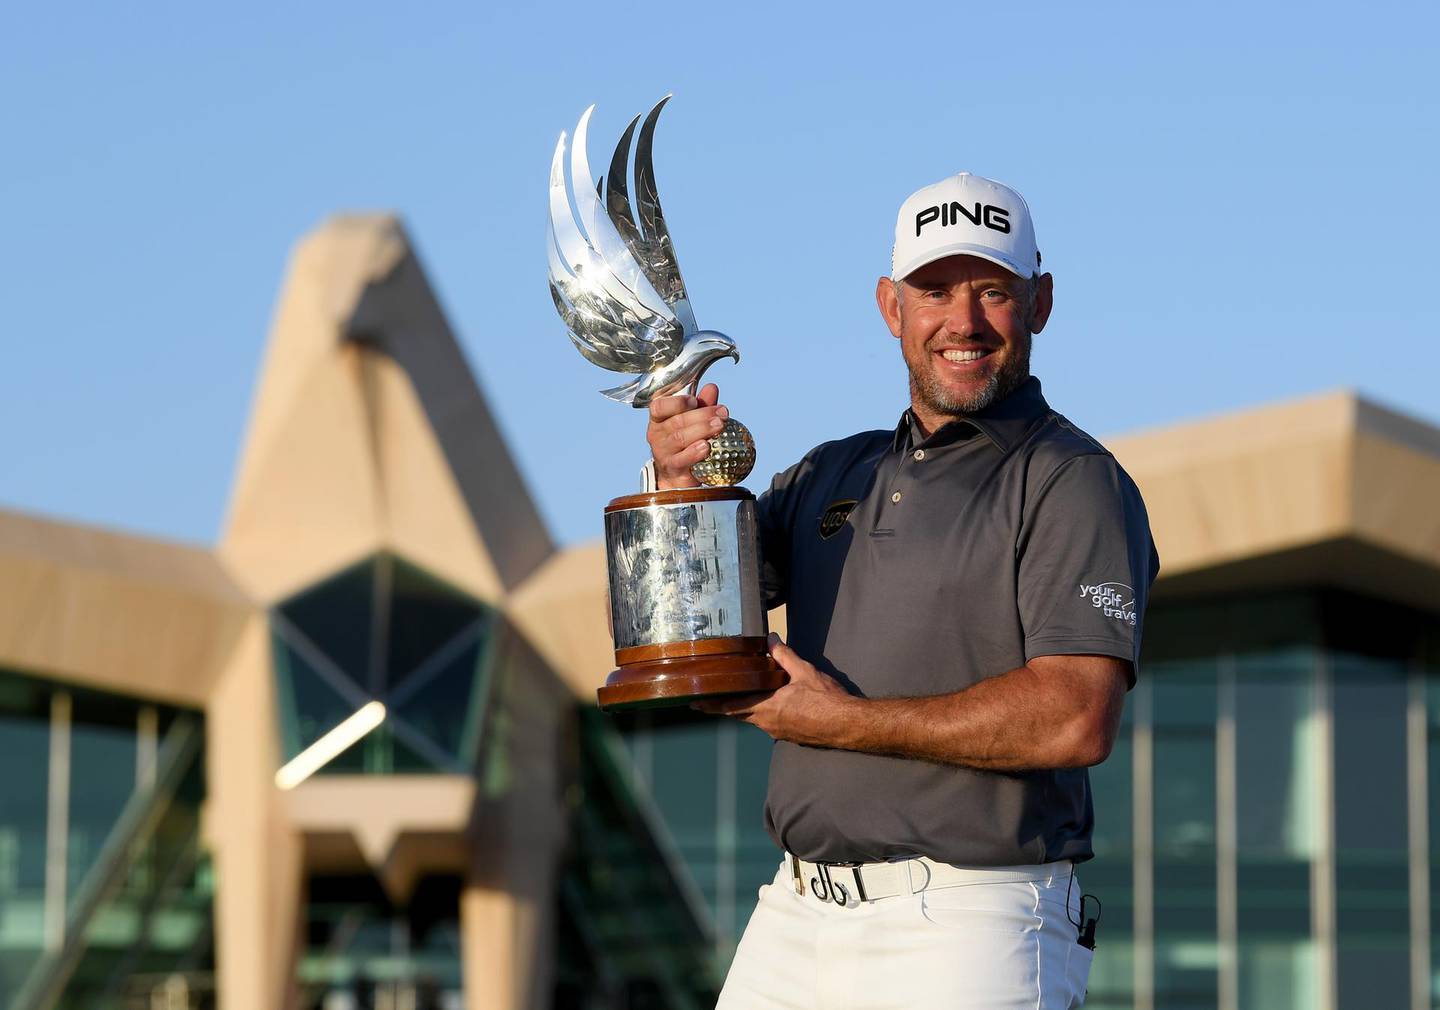 ABU DHABI, UNITED ARAB EMIRATES - JANUARY 19:  Lee Westwood of England poses with the trophy after the final round of the Abu Dhabi HSBC Championship at Abu Dhabi Golf Club on January 19, 2020 in Abu Dhabi, United Arab Emirates. (Photo by Ross Kinnaird/Getty Images)